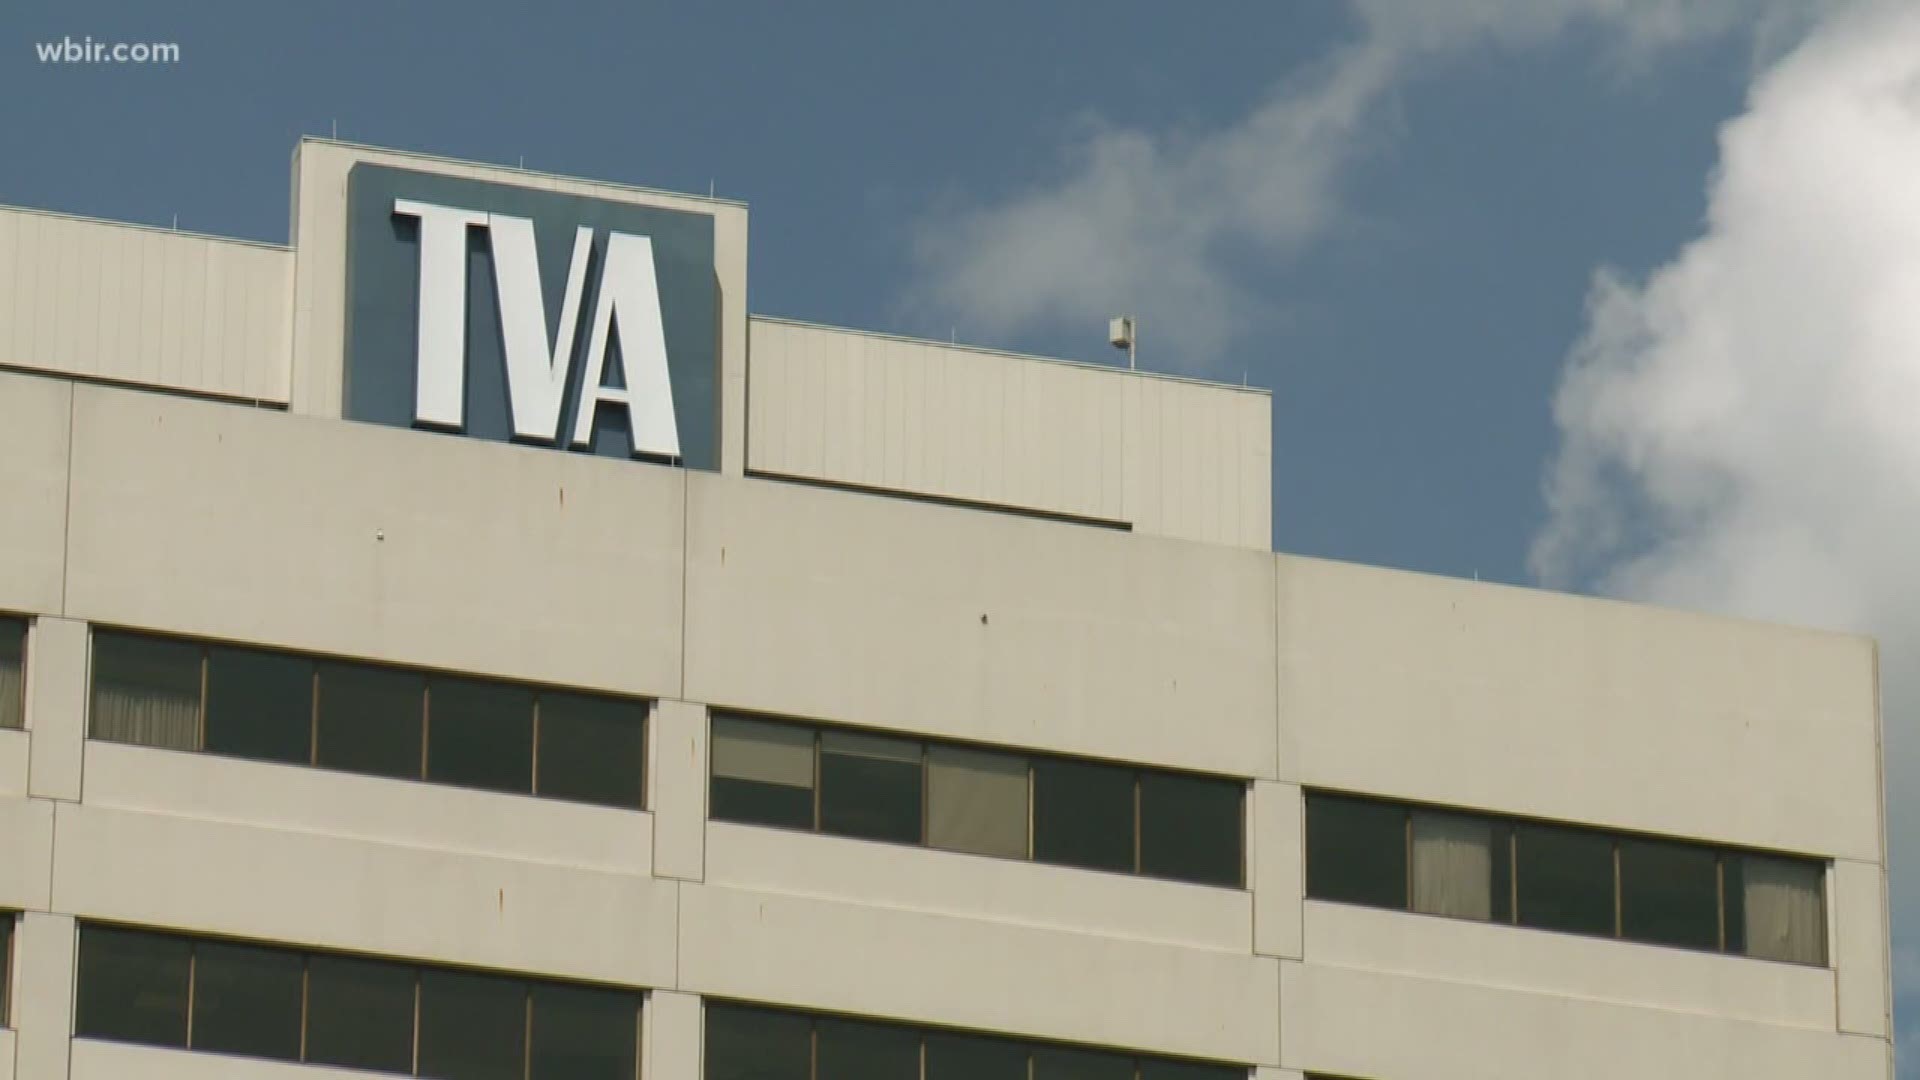 March 29, 2018: A new government report is critical of a move by TVA to buy two airplanes.